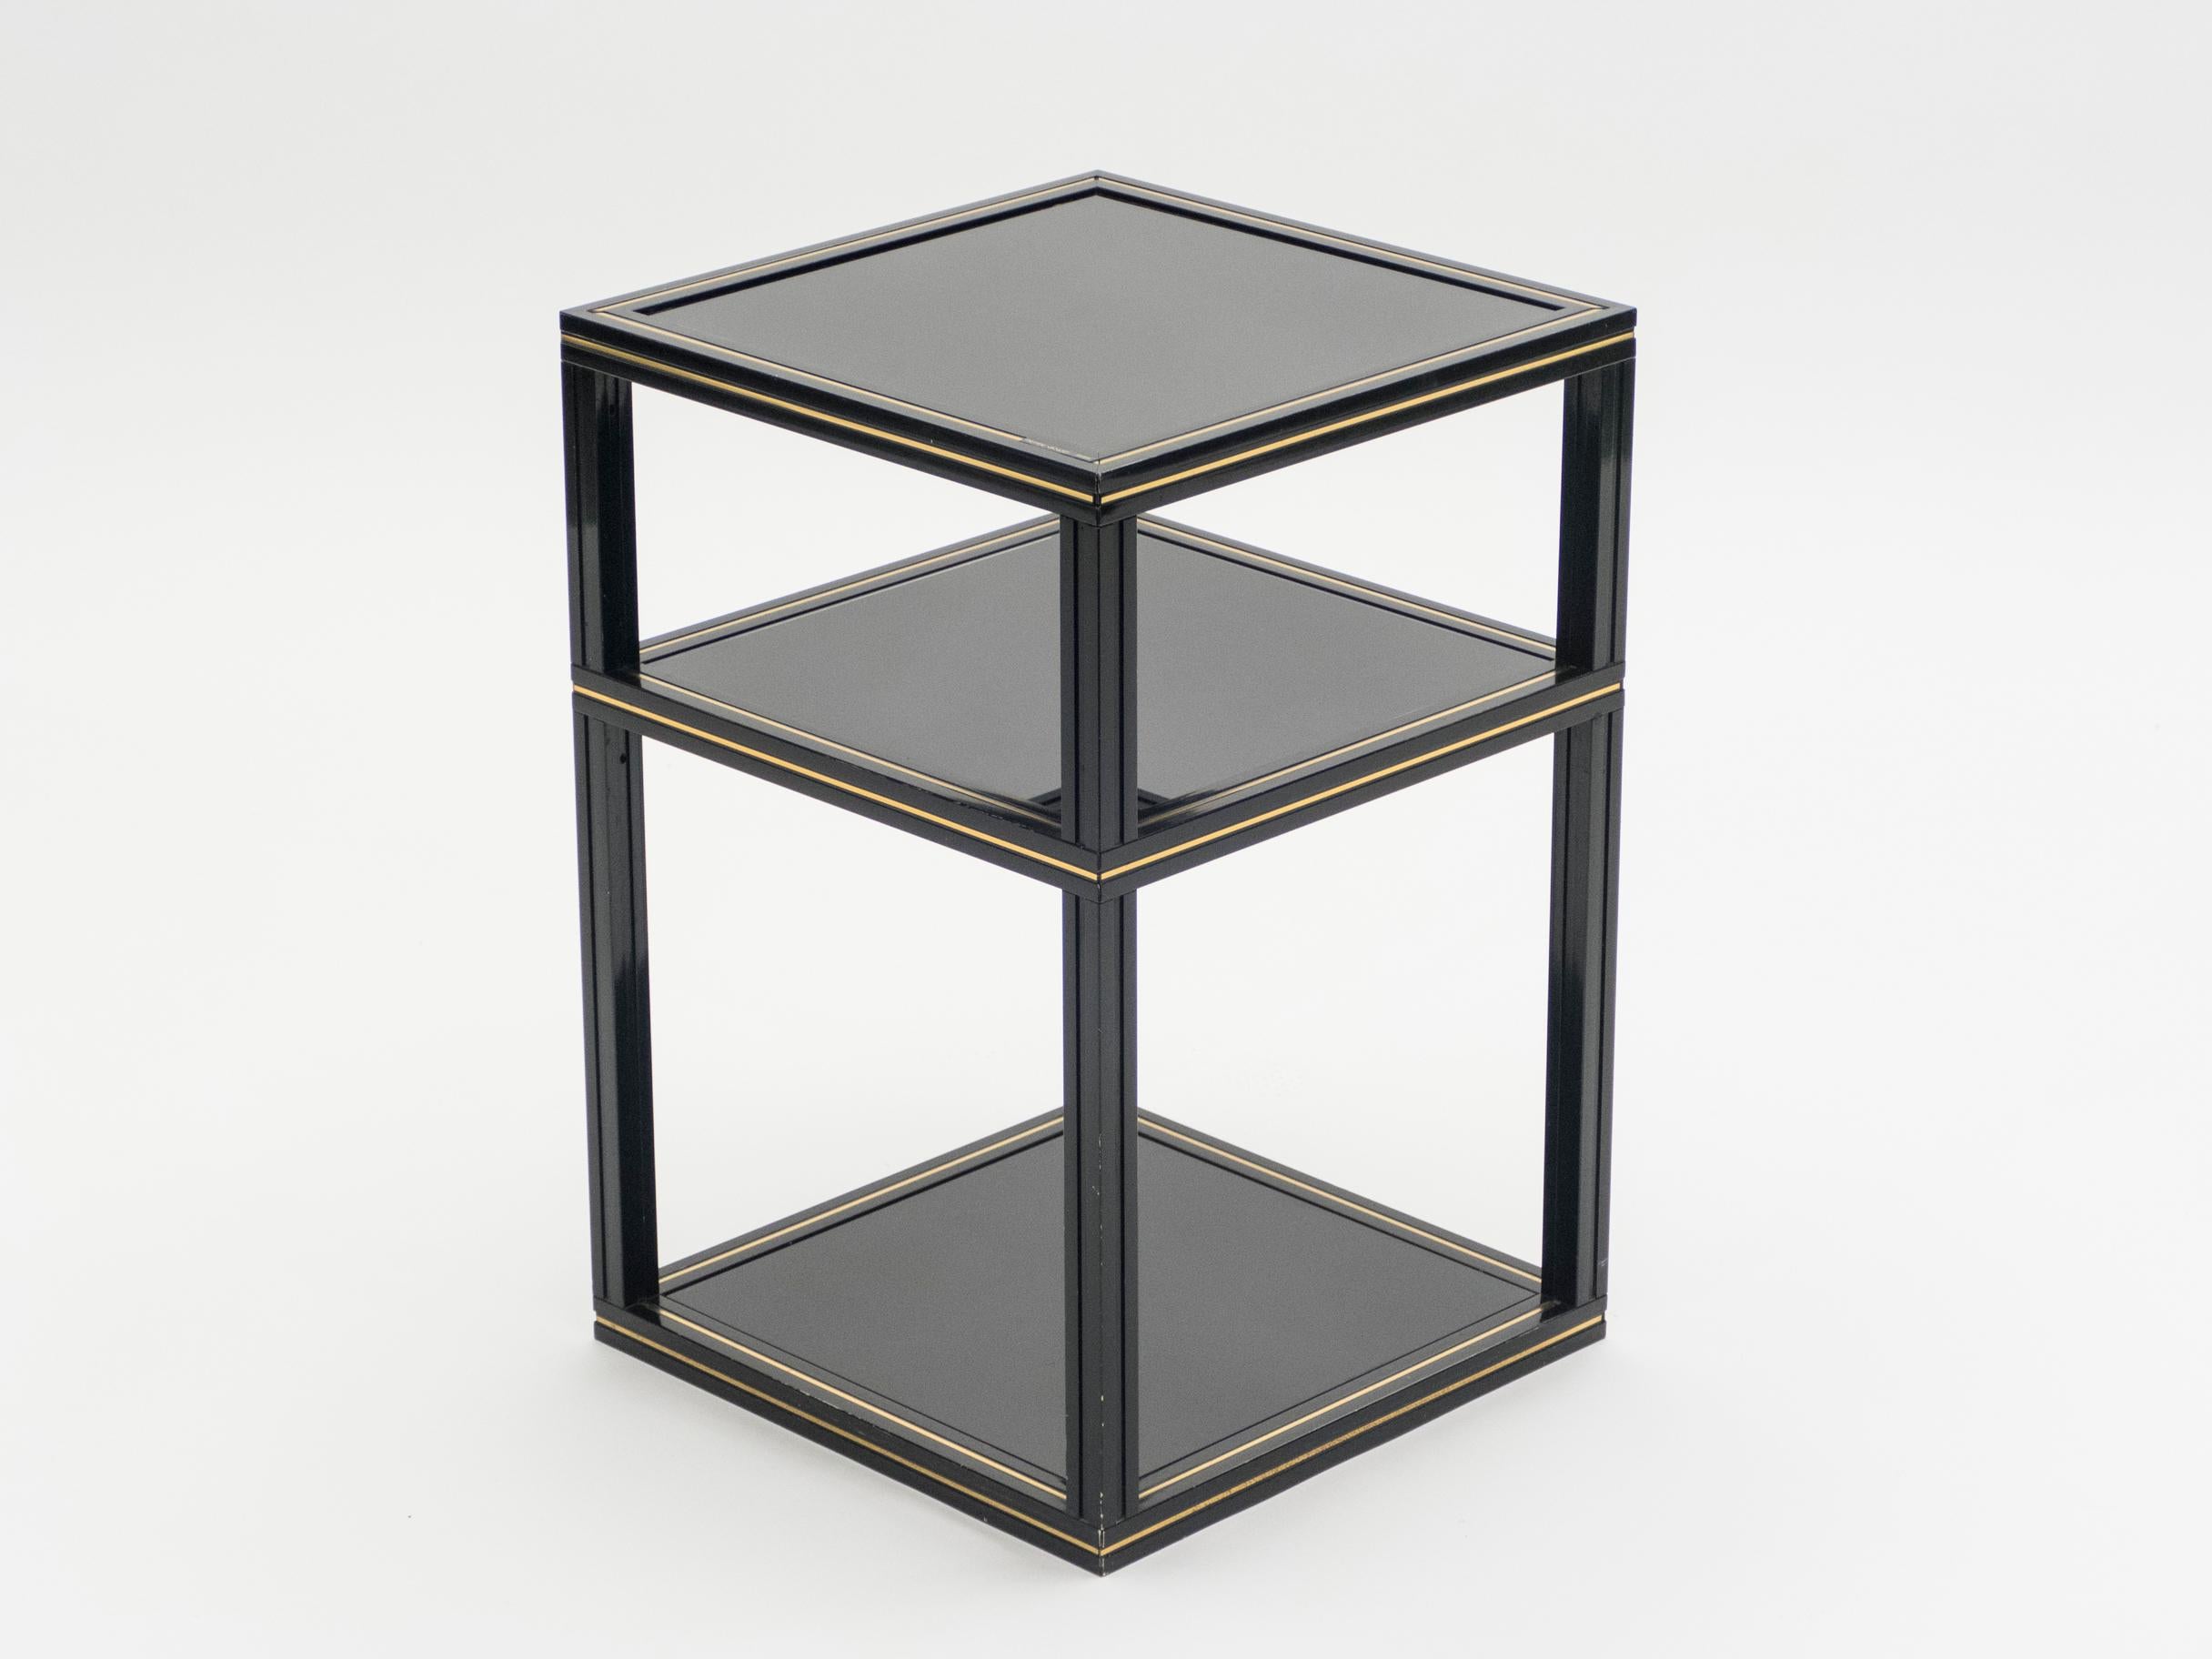 This stately black metal and brass Pierre Vandel side table or pedestal is an elegant Hollywood Regency piece on which to display your vase, lamp, or decorative statue. This 3-tiers black opaline glass table is a simple way to add a dash of 1970s